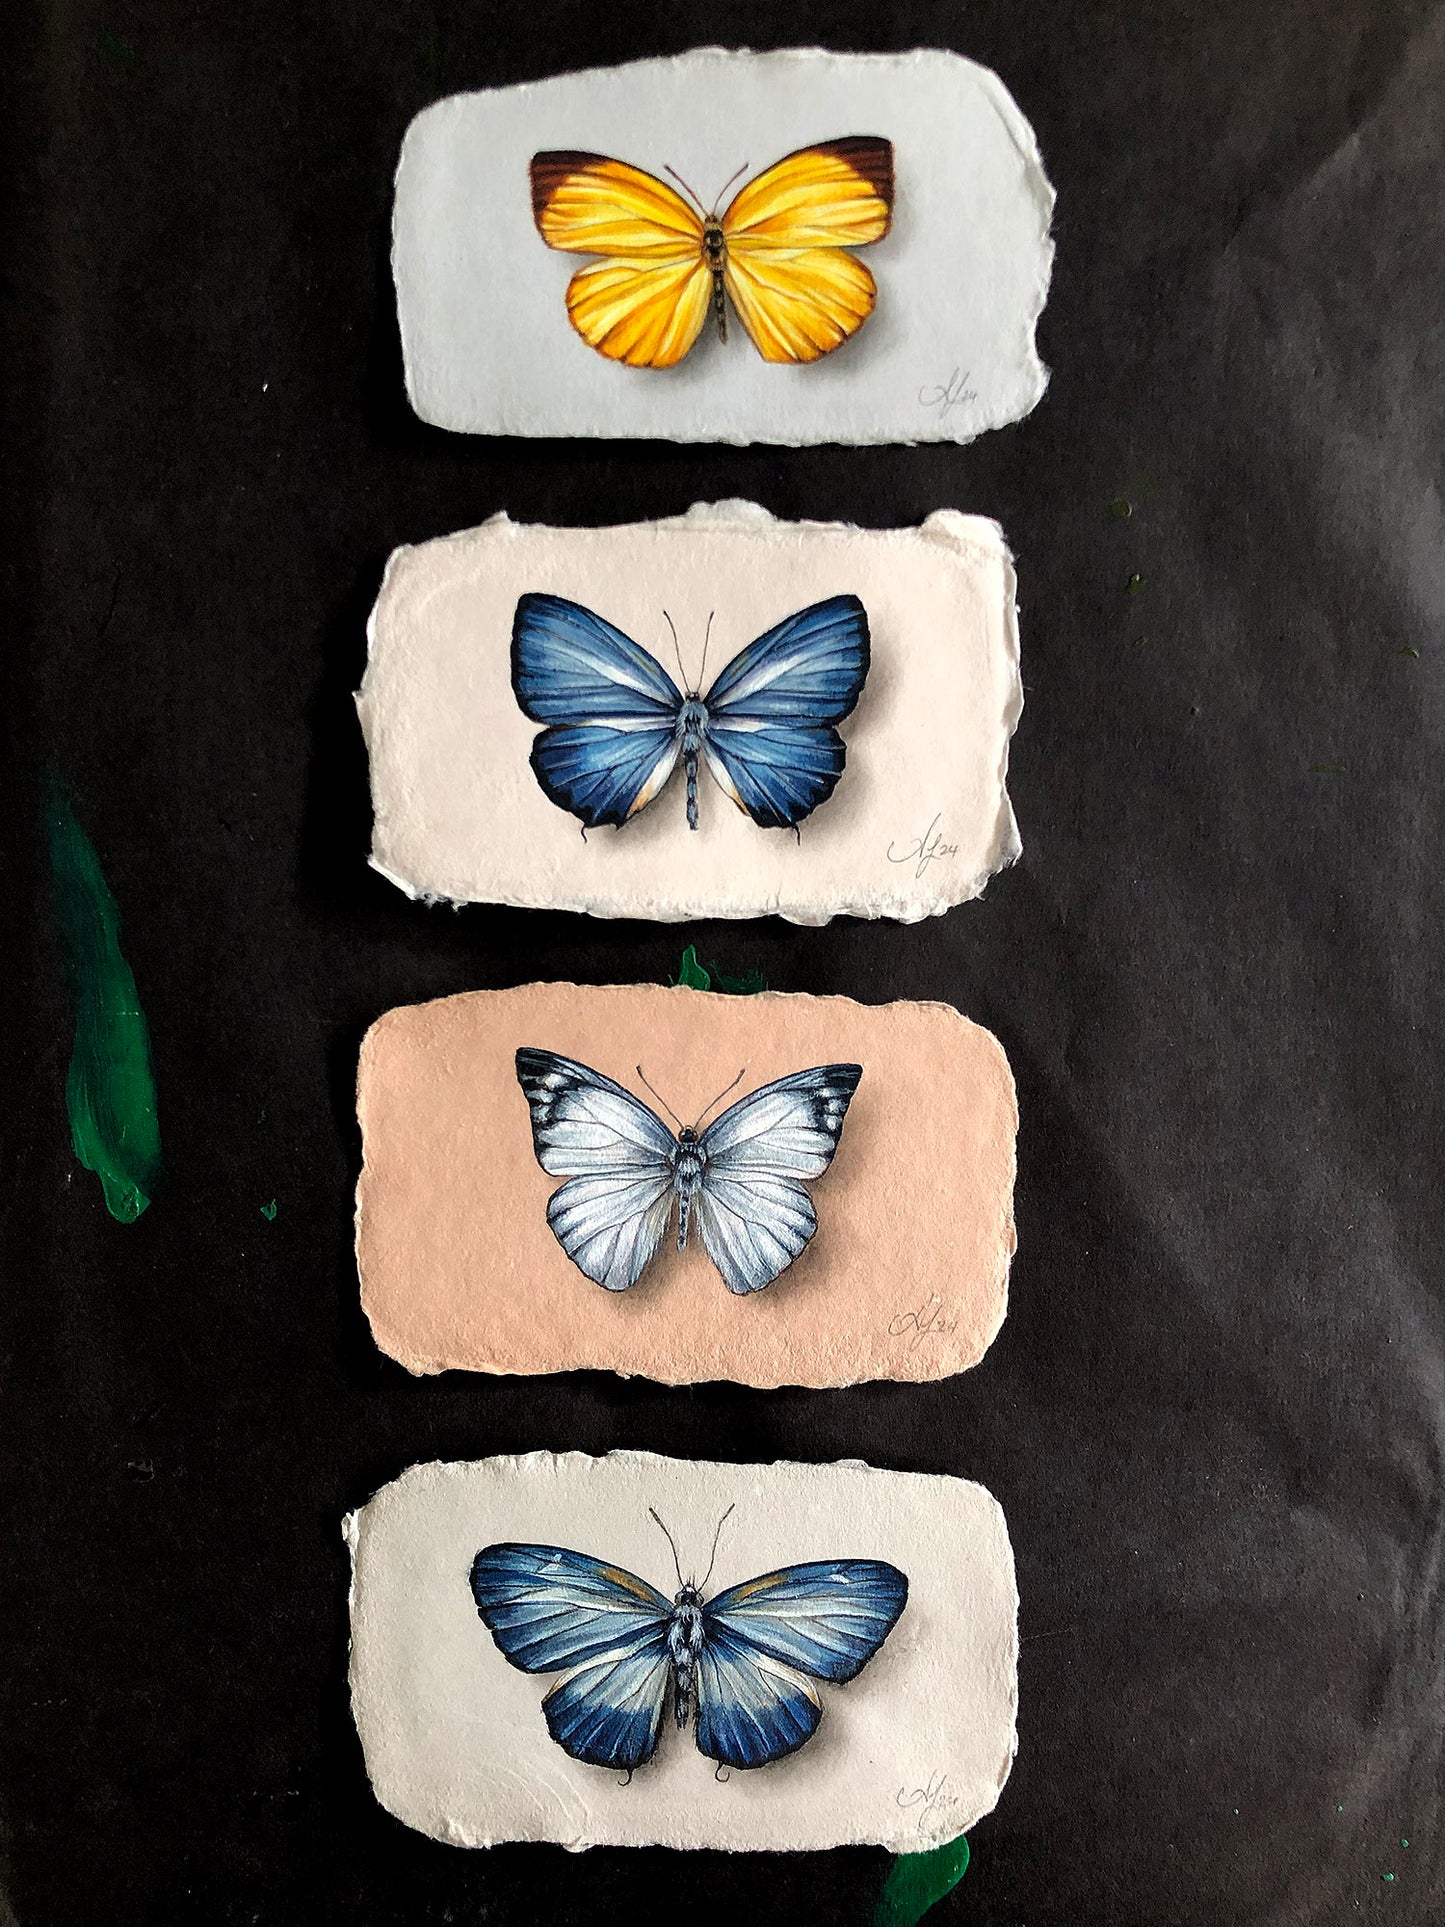 Butterfly on Handmade Paper #6 - 4.5 x 2.5"